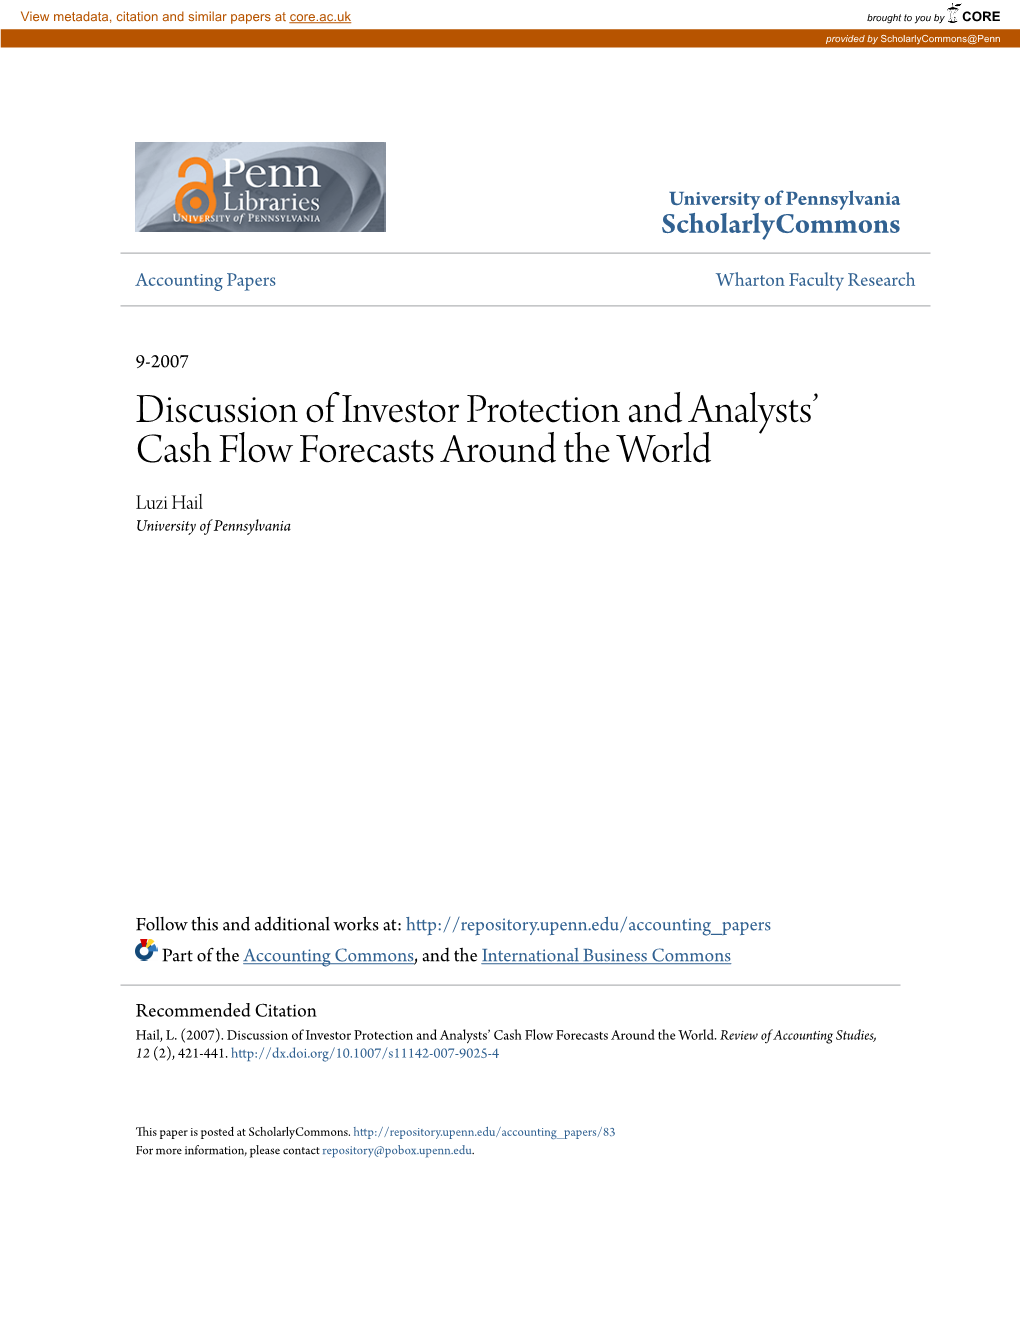 Discussion of Investor Protection and Analysts' Cash Flow Forecasts